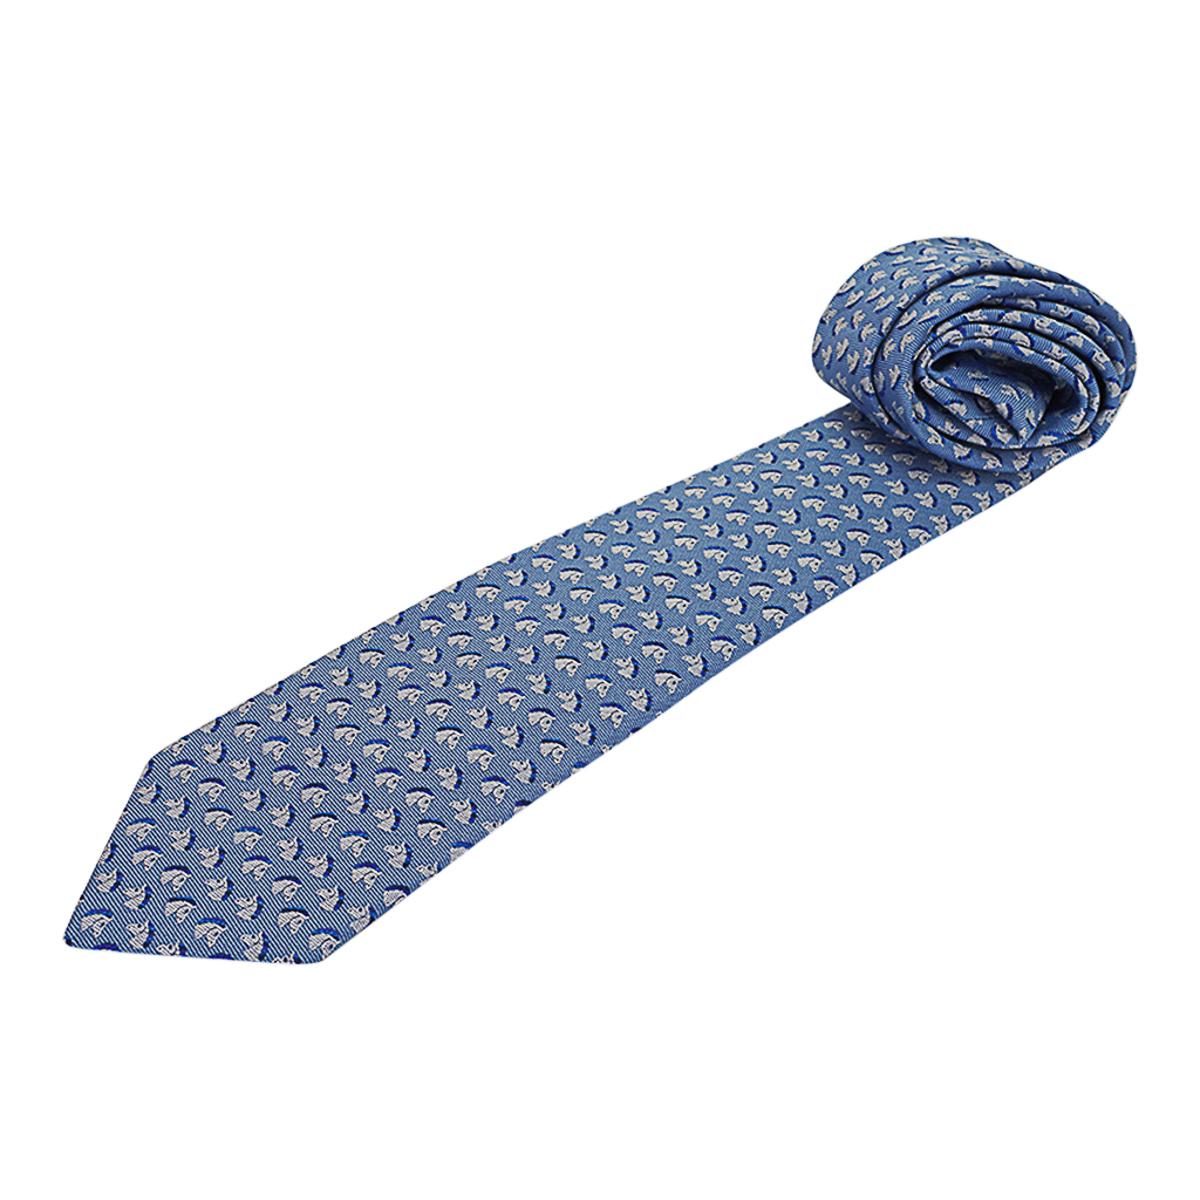 Hermes Cheval Rebelle Tie 7 Ciel Blanc and Marine Heavy Silk Twill For Sale 2